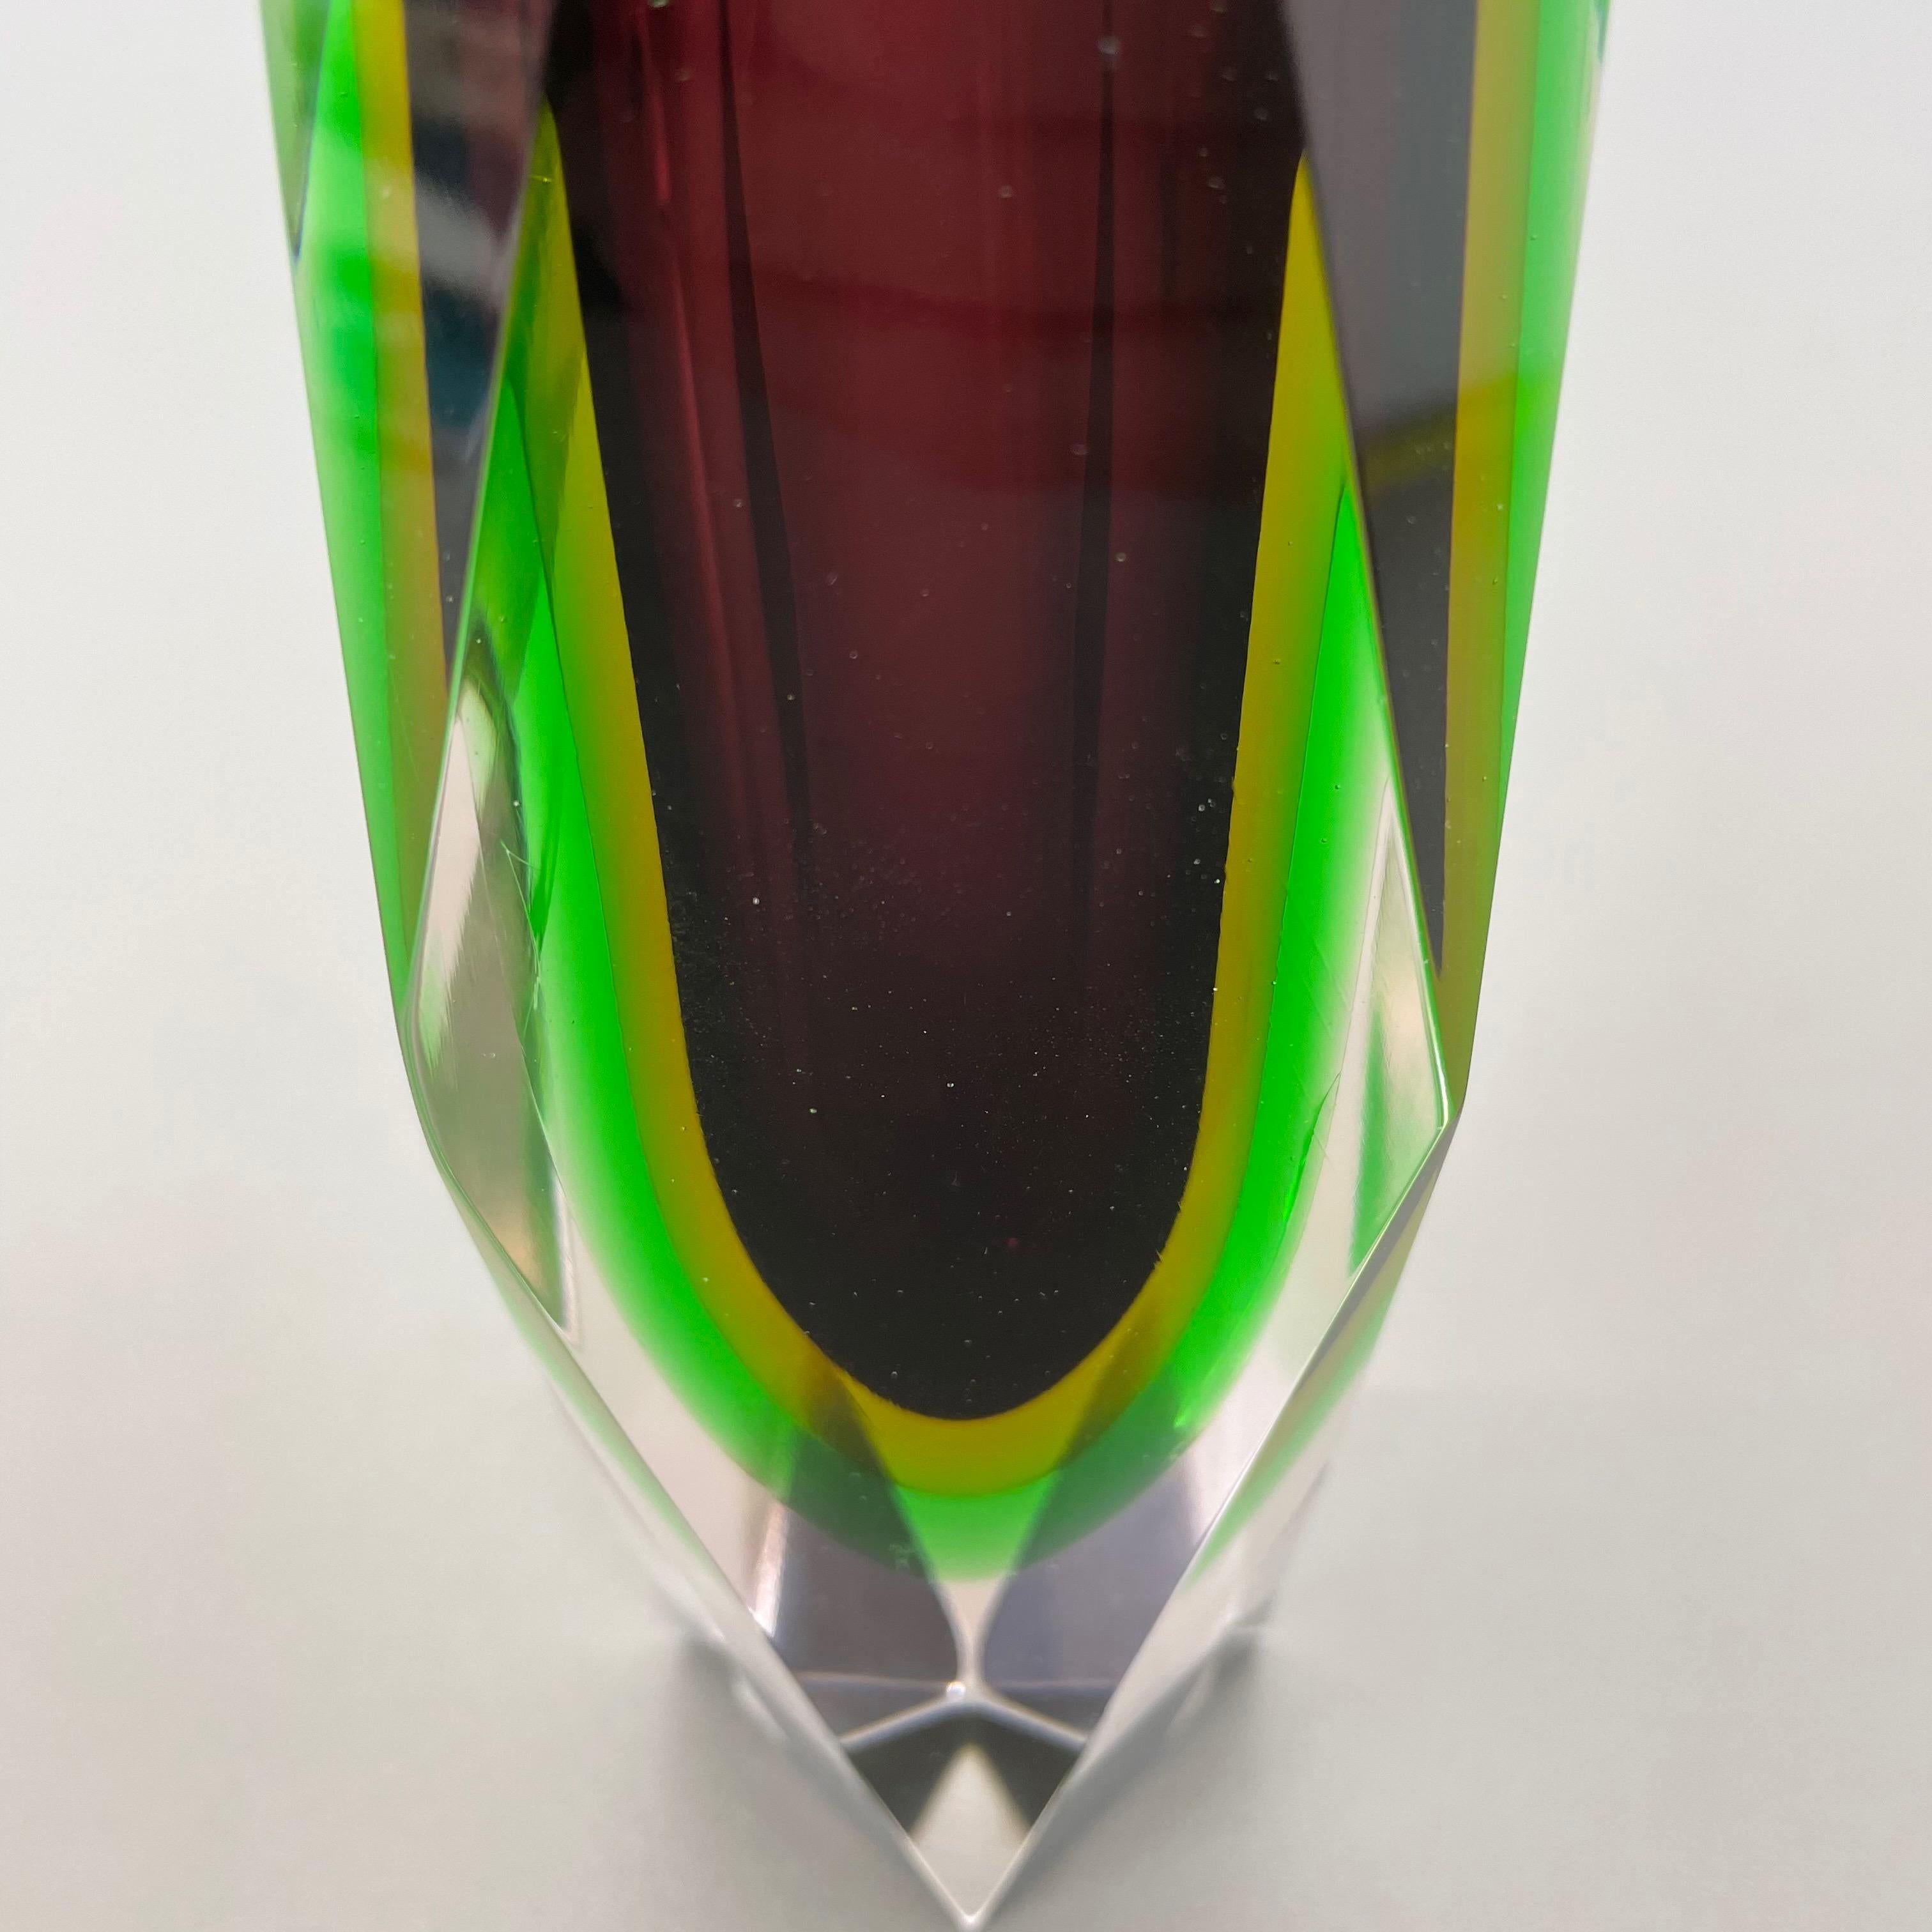 Heavy Large Murano Glass Sommerso 4 Colors Vase by Flavio Poli, Italy, 1970s For Sale 1